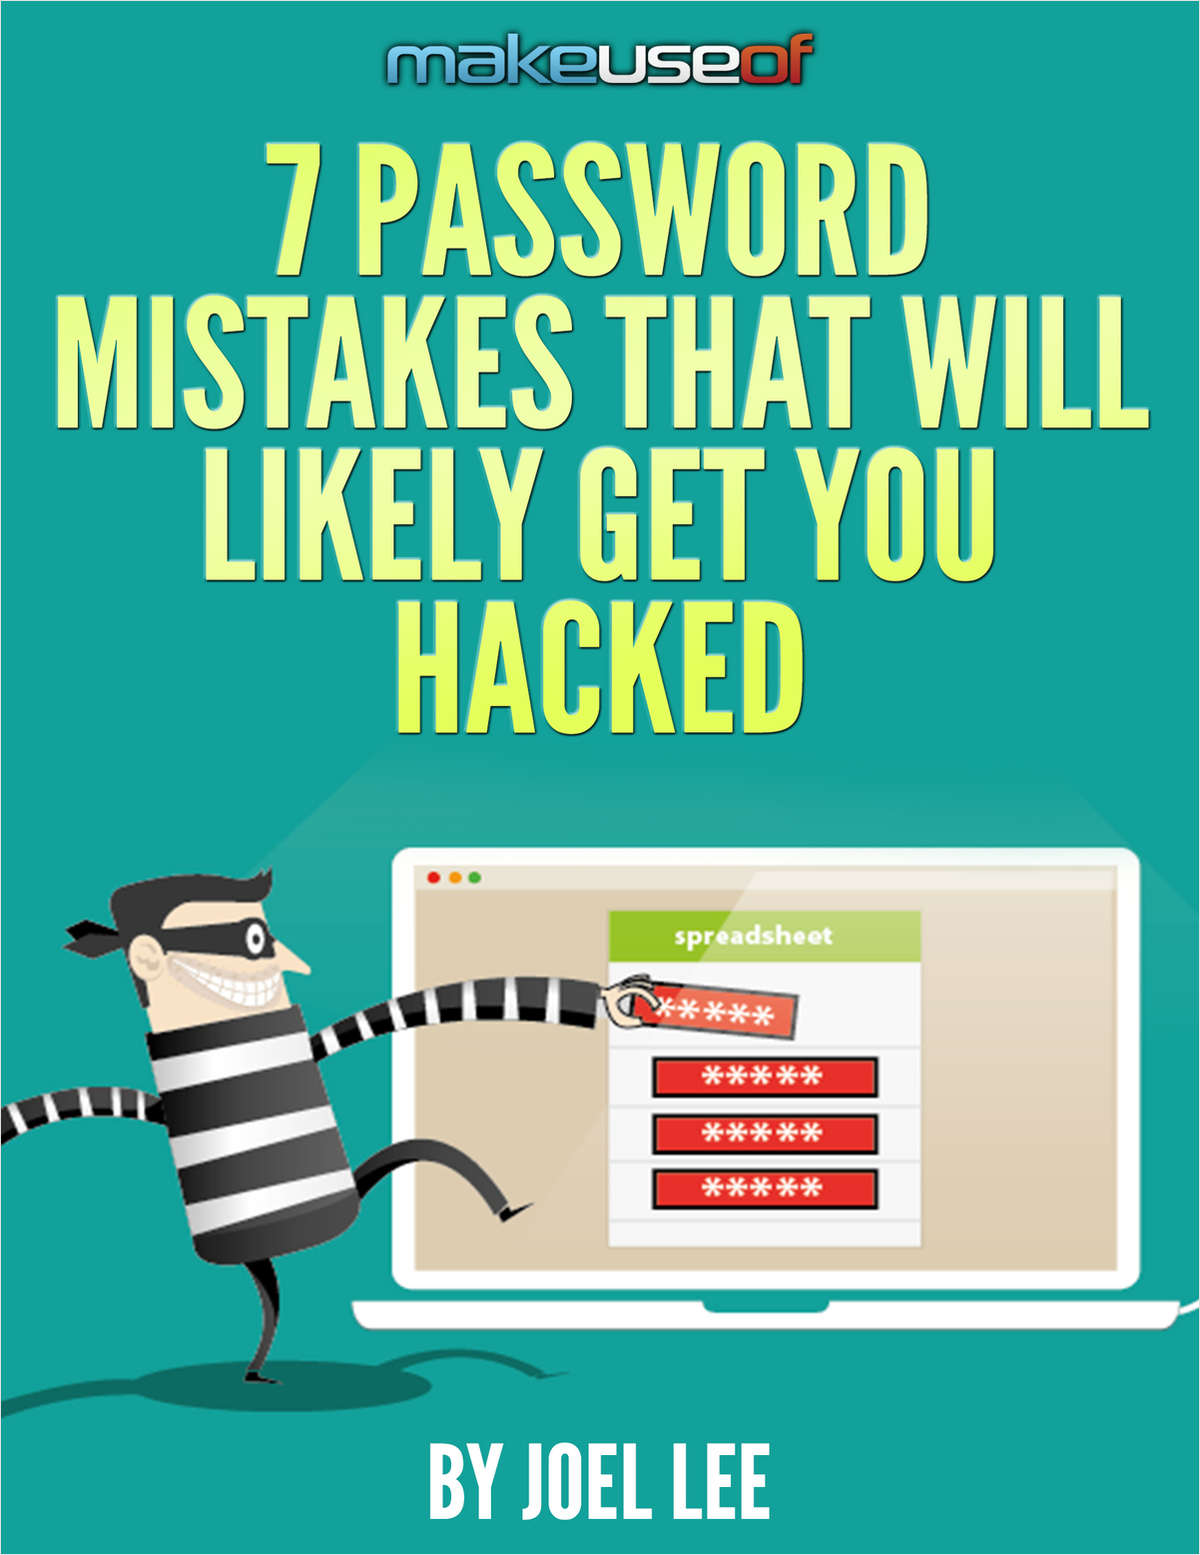 7 Password Mistakes That Will Likely Get You Hacked